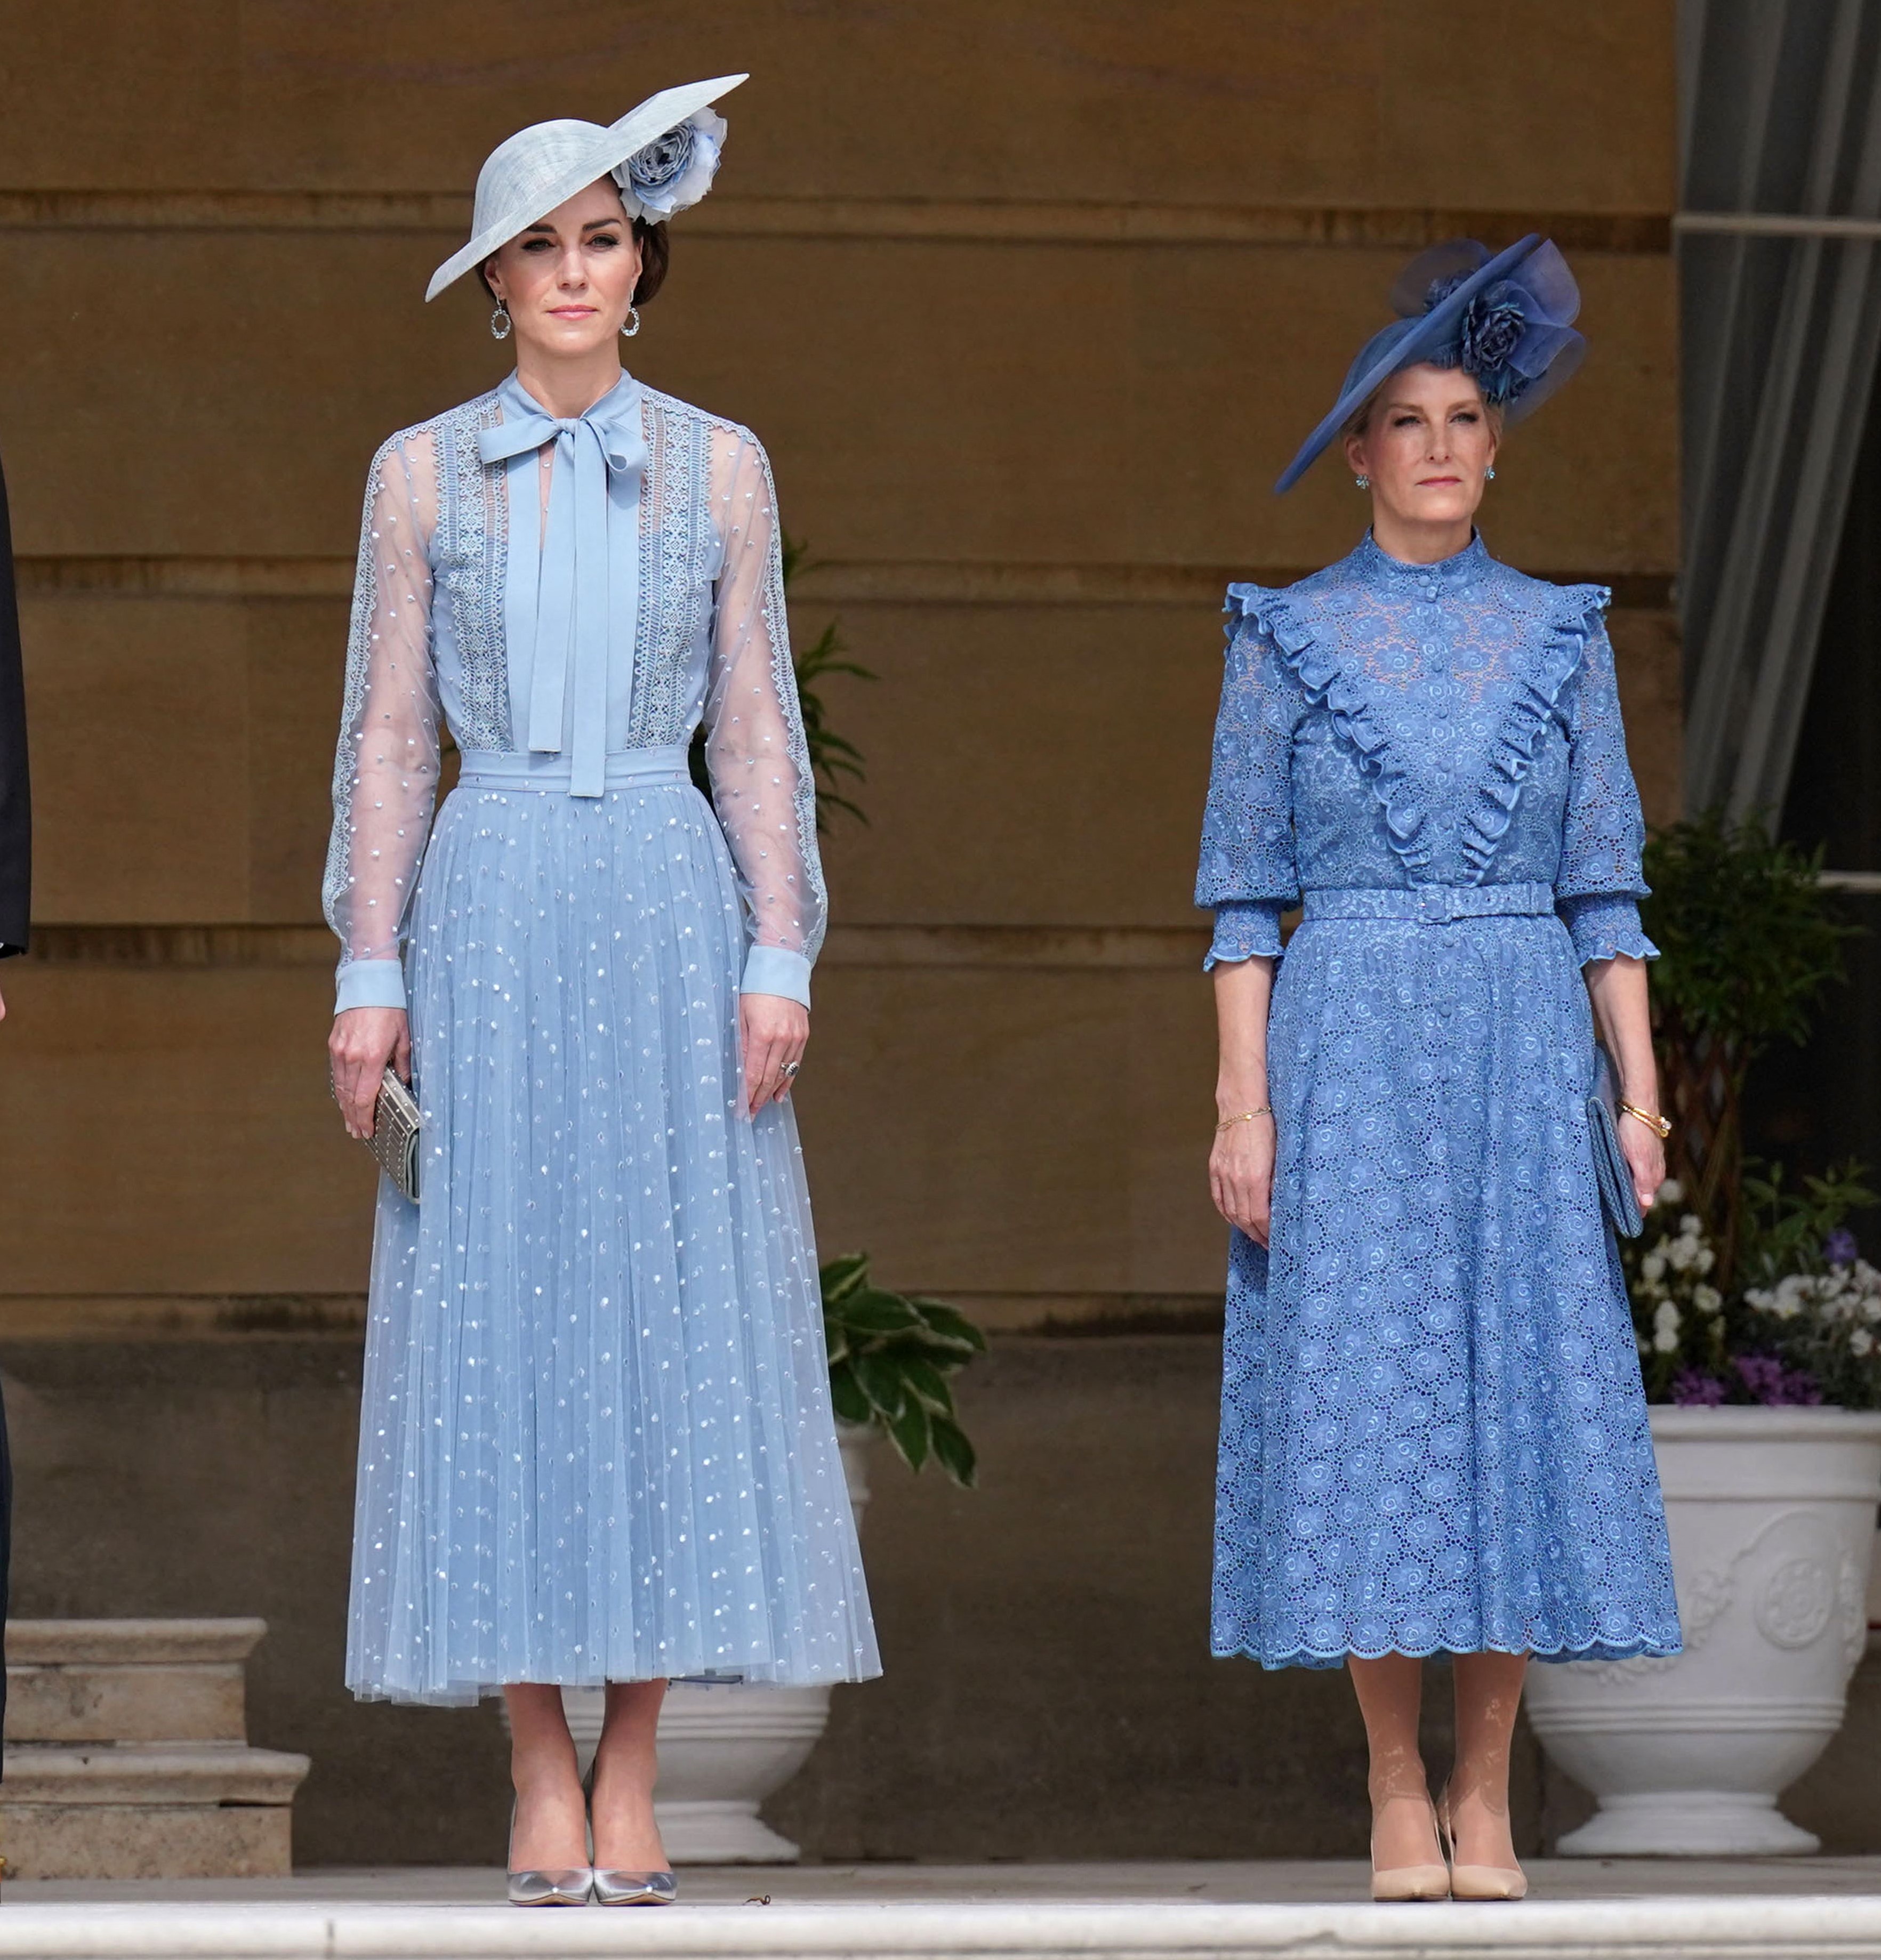 Kate Middleton and Sophie, Duchess of Edinburgh attend a Garden Party at Buckingham Palace in London